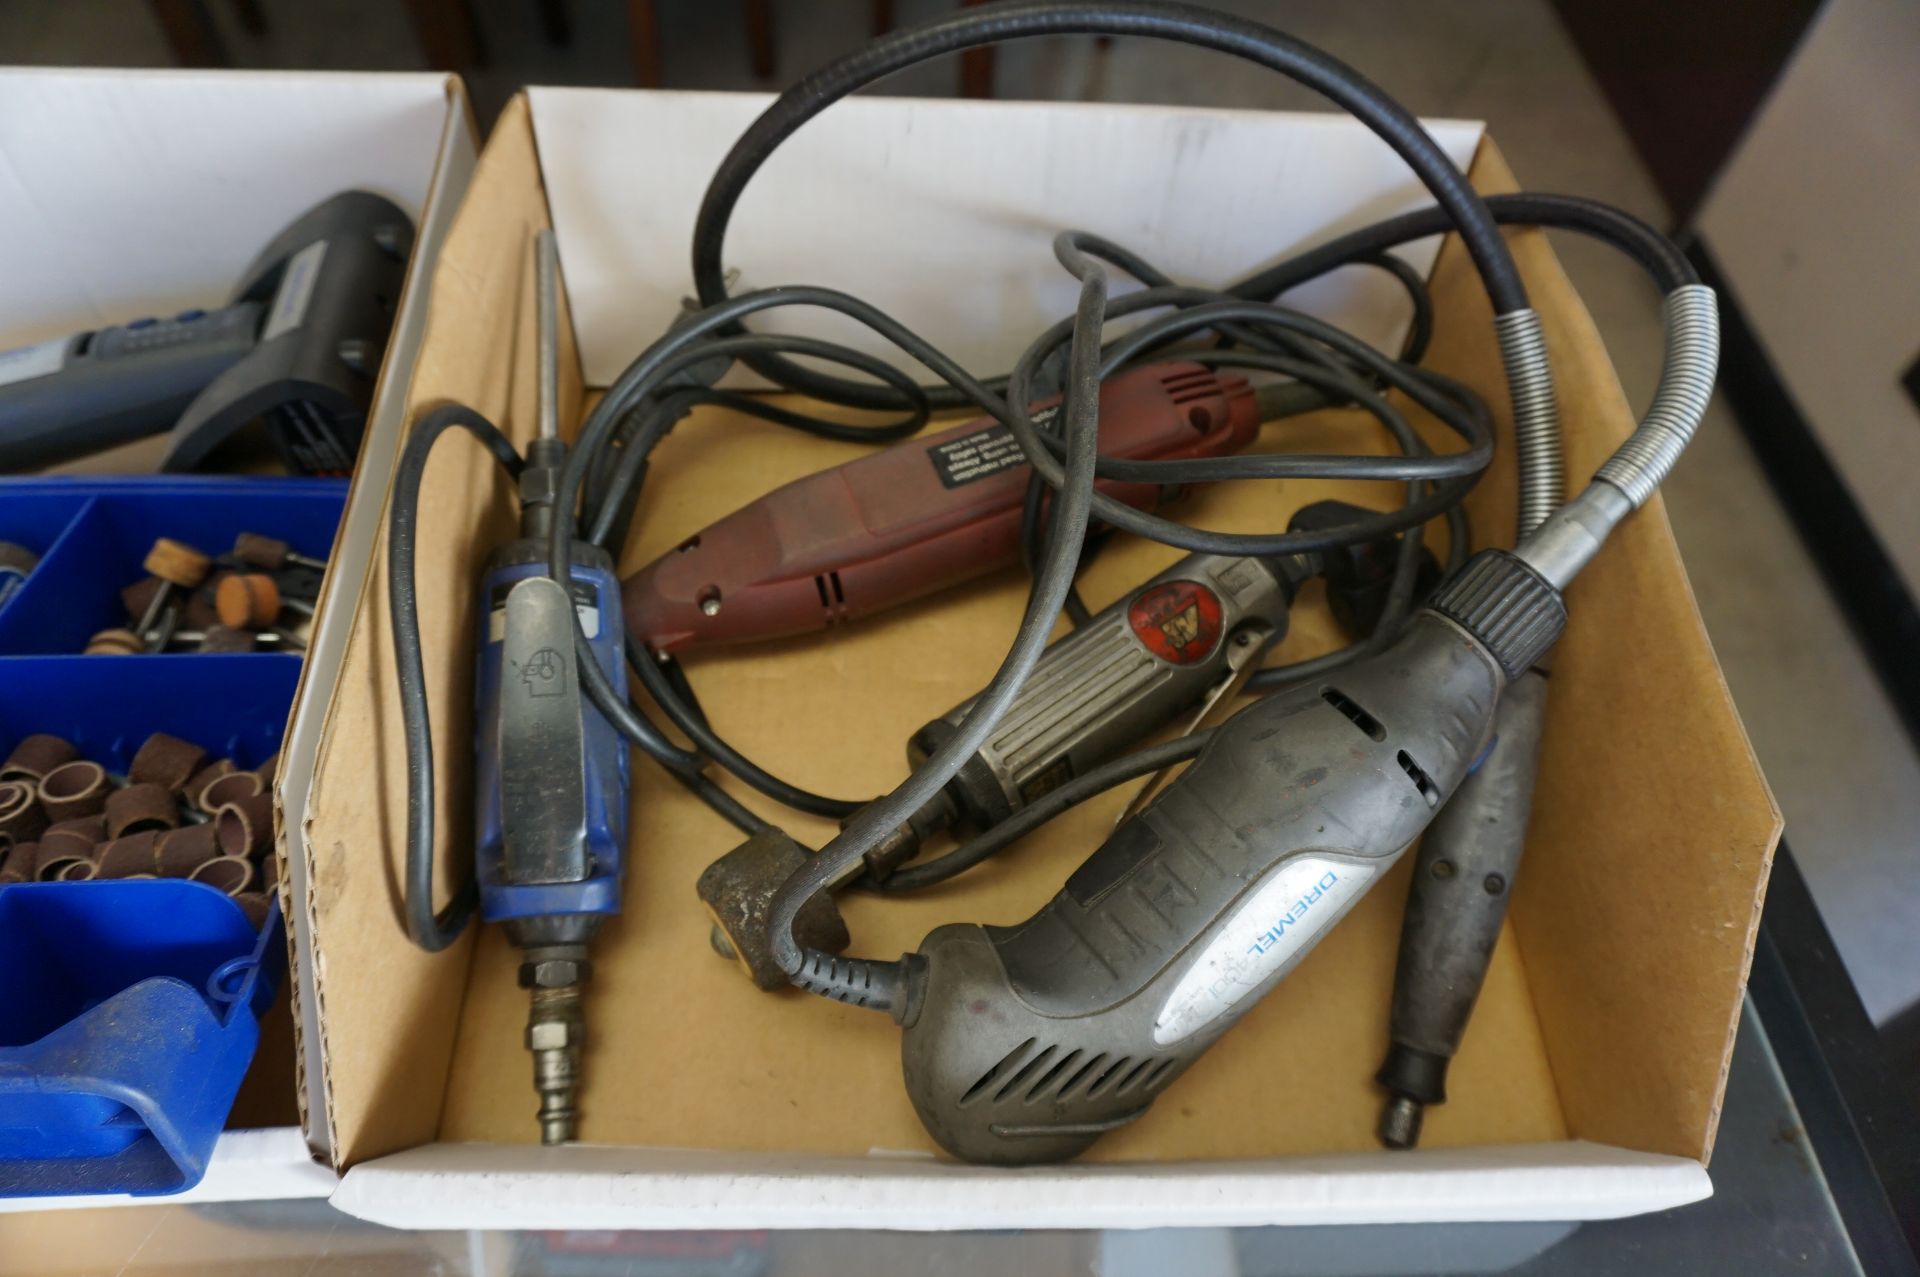 LOT TO INCLUDE: DREMEL MICRO WITH ACCESSORIES, MISC. ELECTRIC AND PNEUMATIC GRINDERS - Image 4 of 6